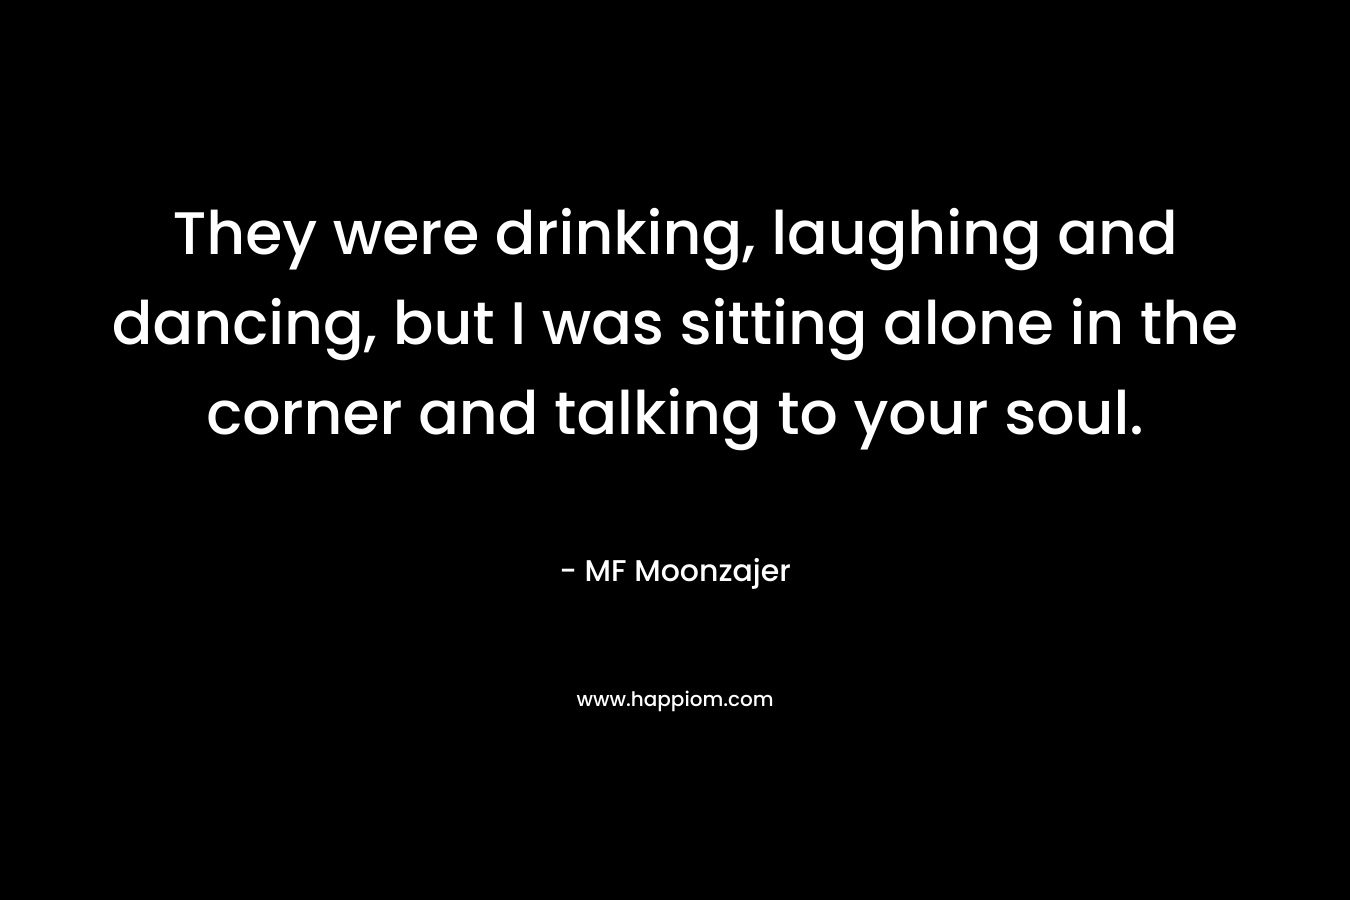 They were drinking, laughing and dancing, but I was sitting alone in the corner and talking to your soul. – MF Moonzajer